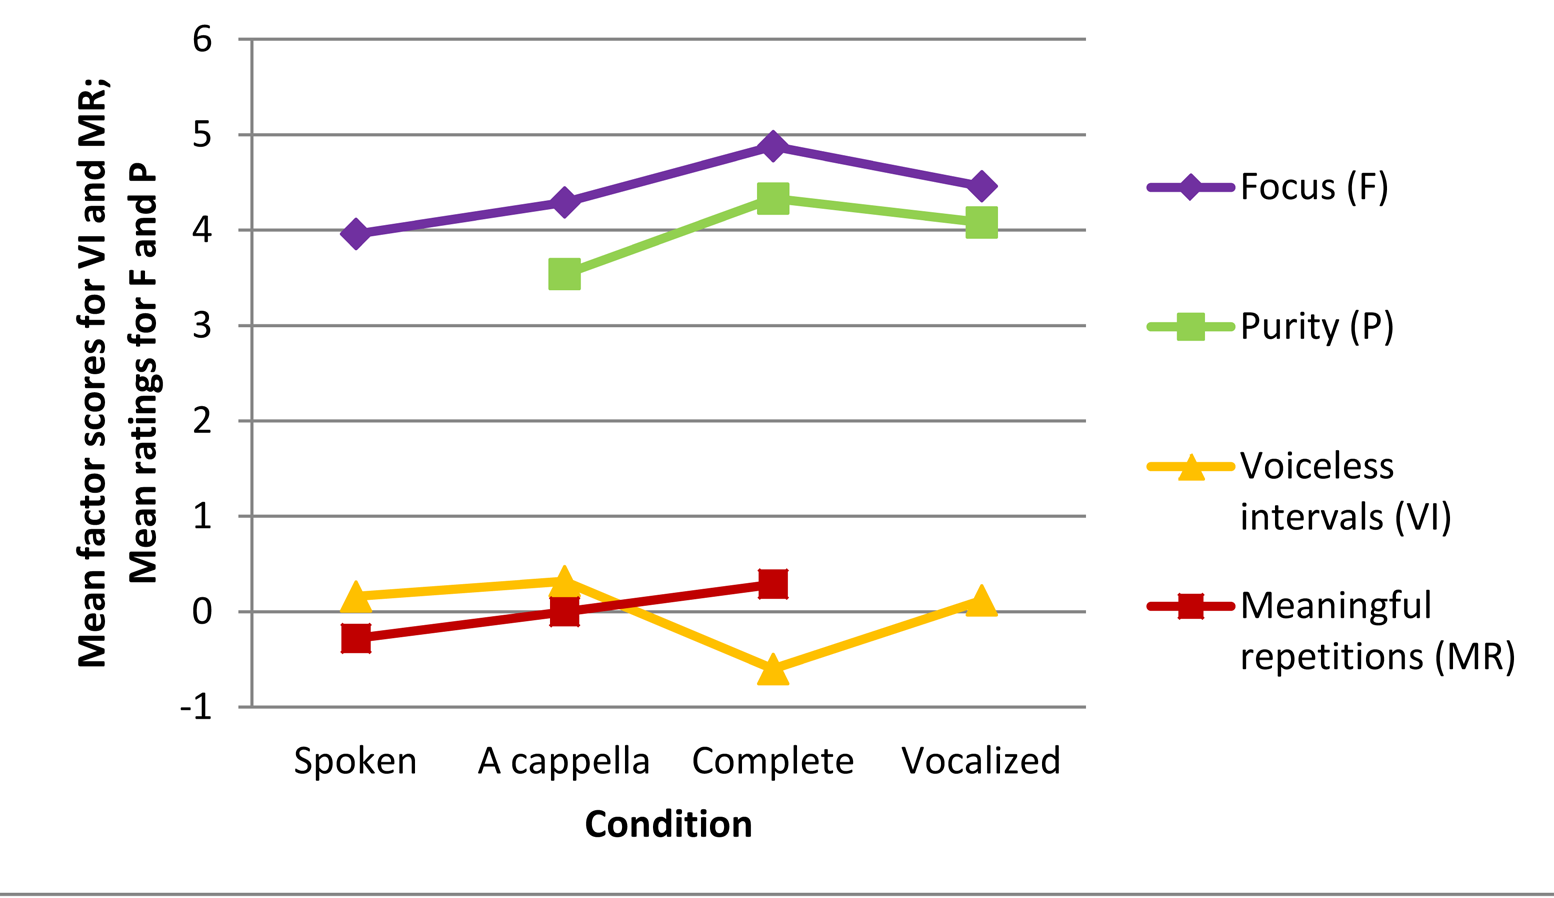 Line graph depicting mean factor scores for Voiceless intervals and Meaningful repititions, as well as mean ratings for Focus and Purity compared to condition. More description above and below.